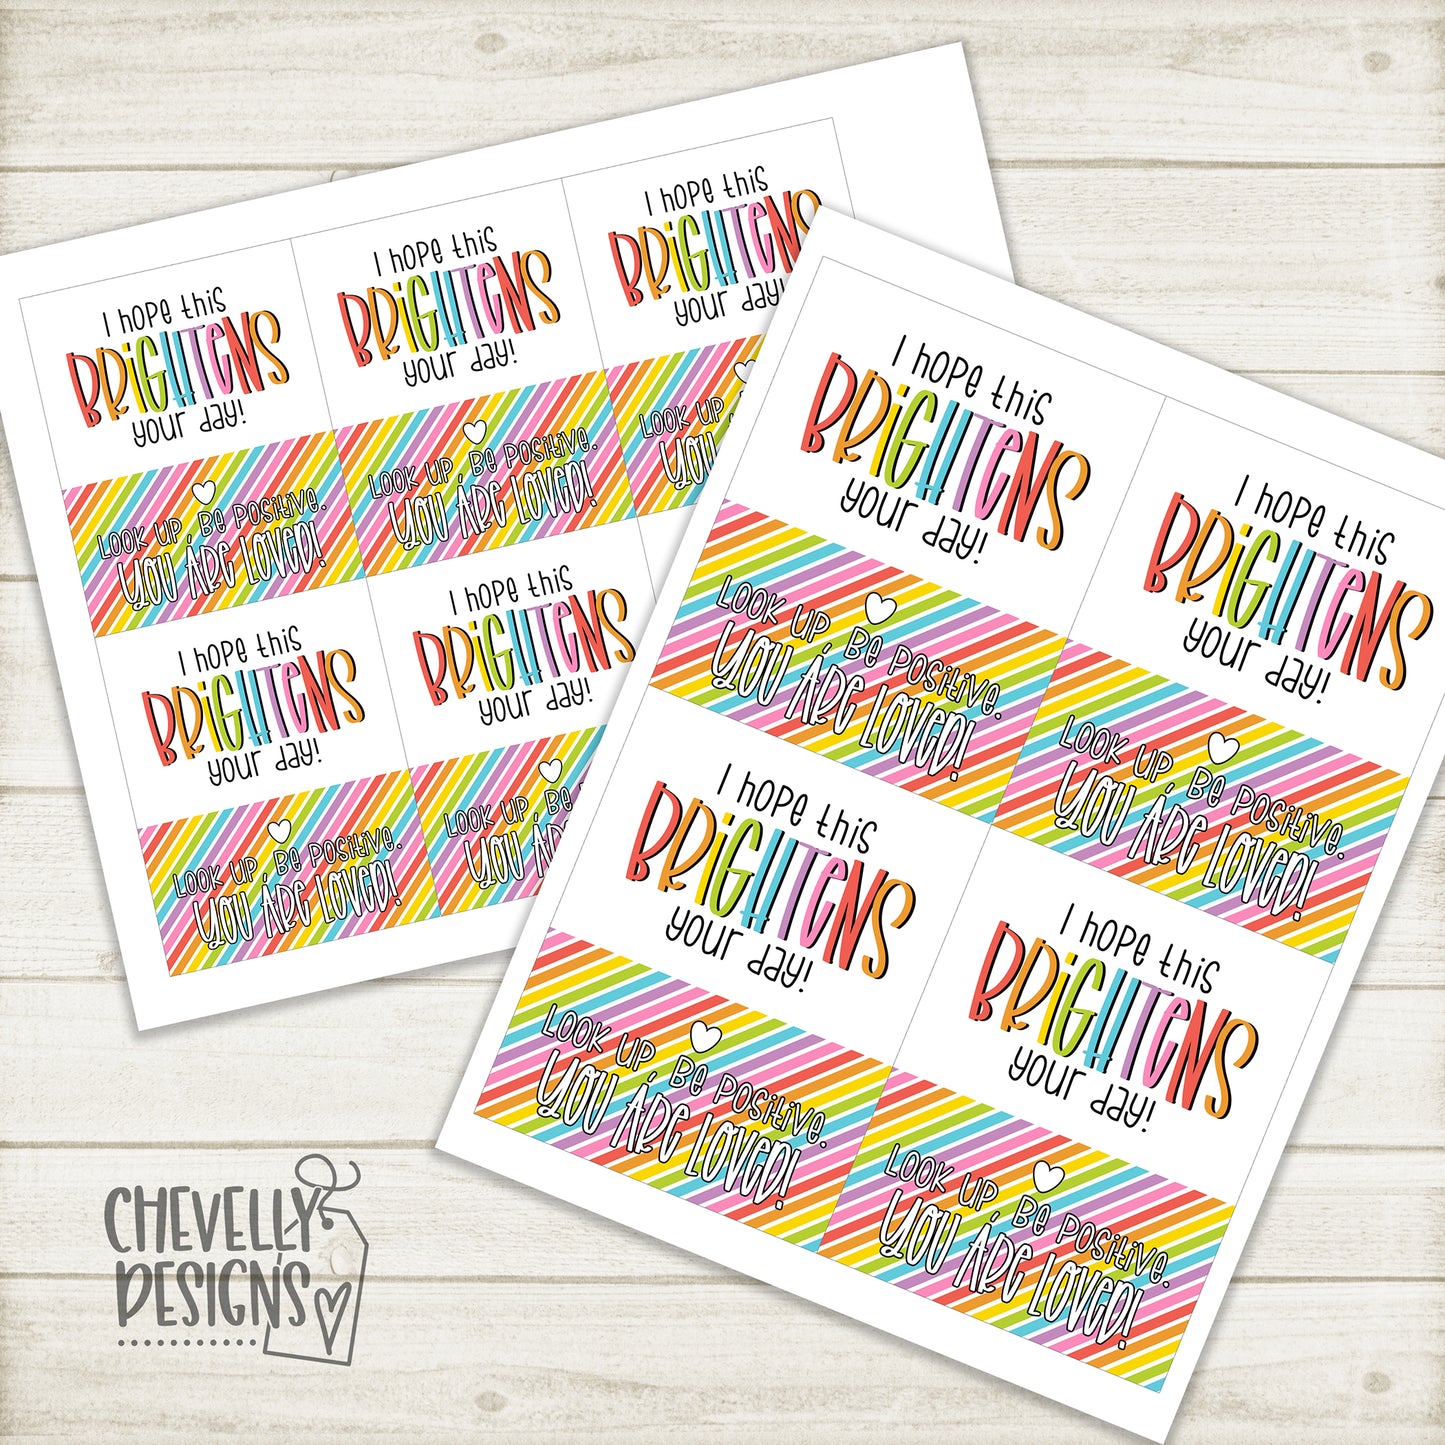 Printable - I Hope This Brightens Your Day - Gift Tags >>>Instant Digital Download<<<